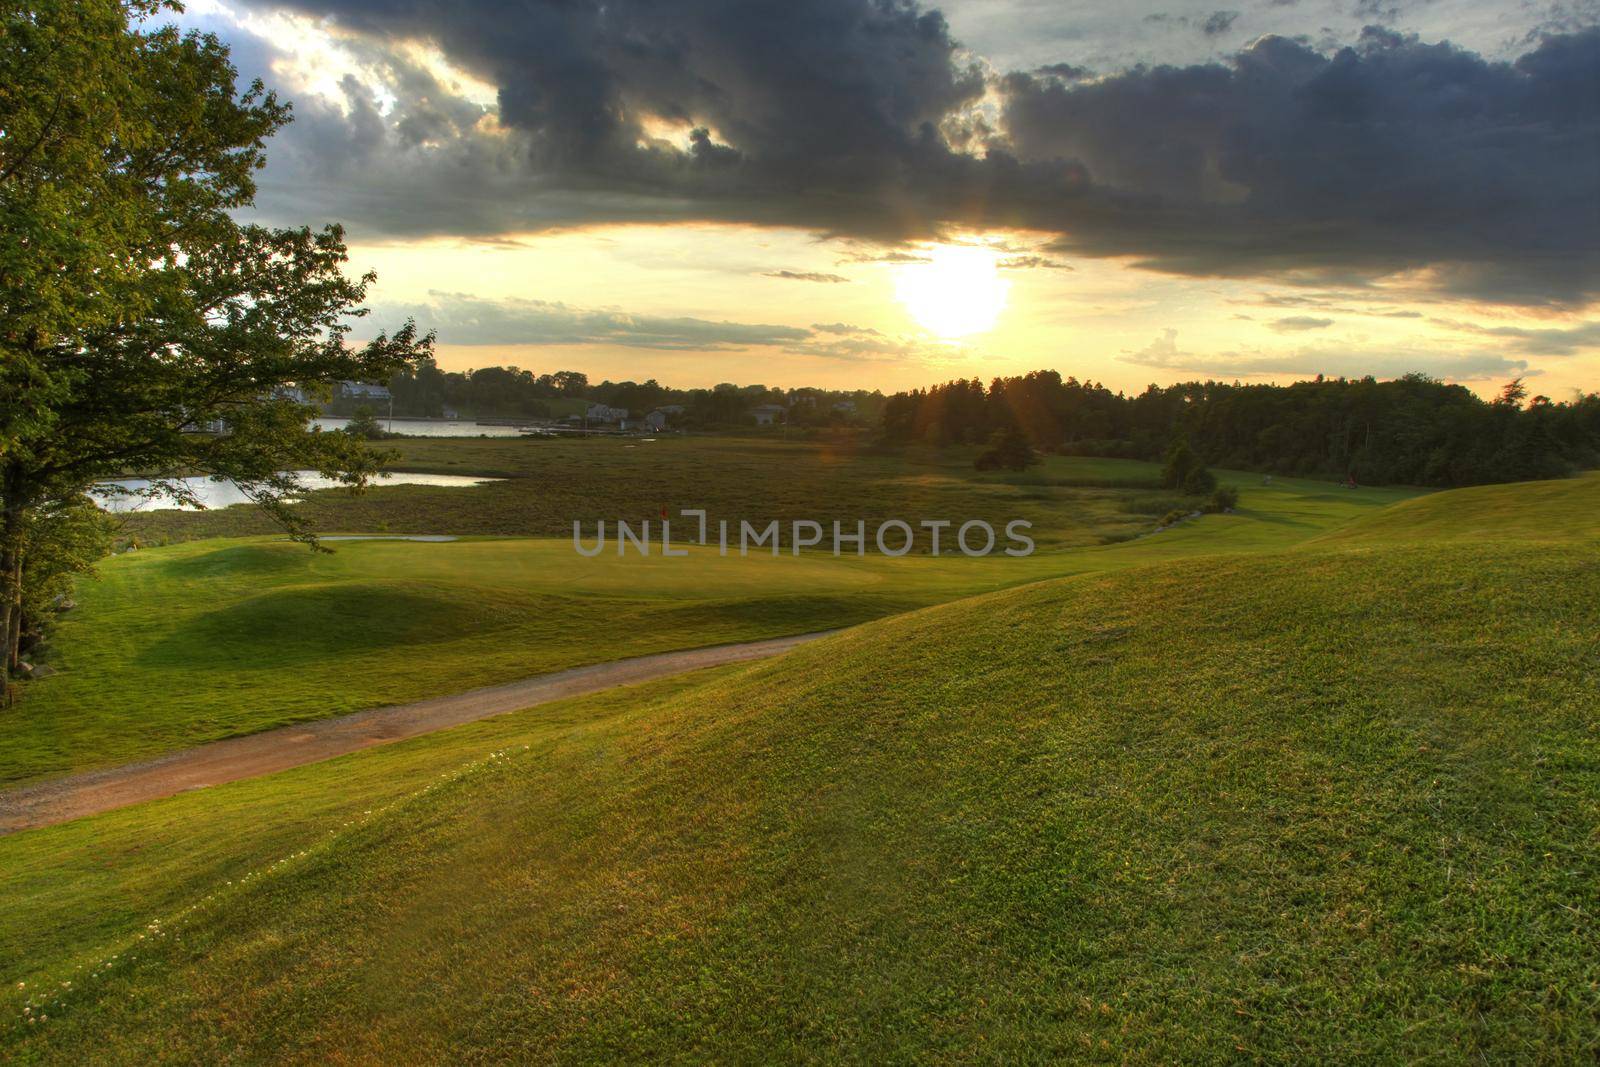 Golf course fairway at sunset on the green 